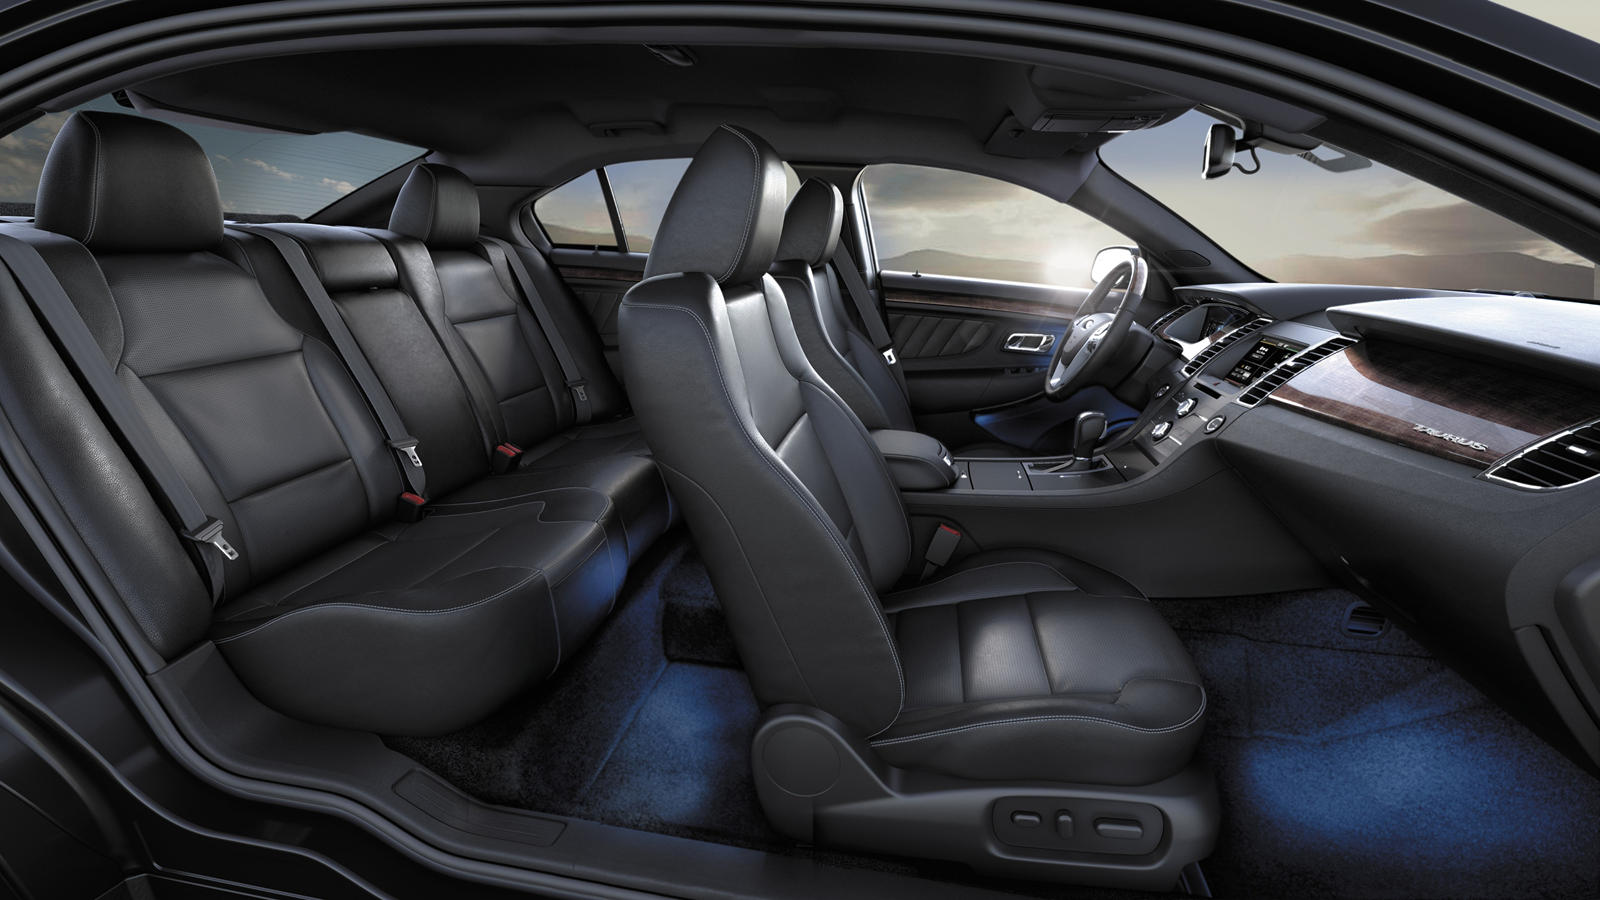 2019 Ford Taurus Interior Dimensions: Seating, Cargo Space & Trunk Size -  Photos | CarBuzz